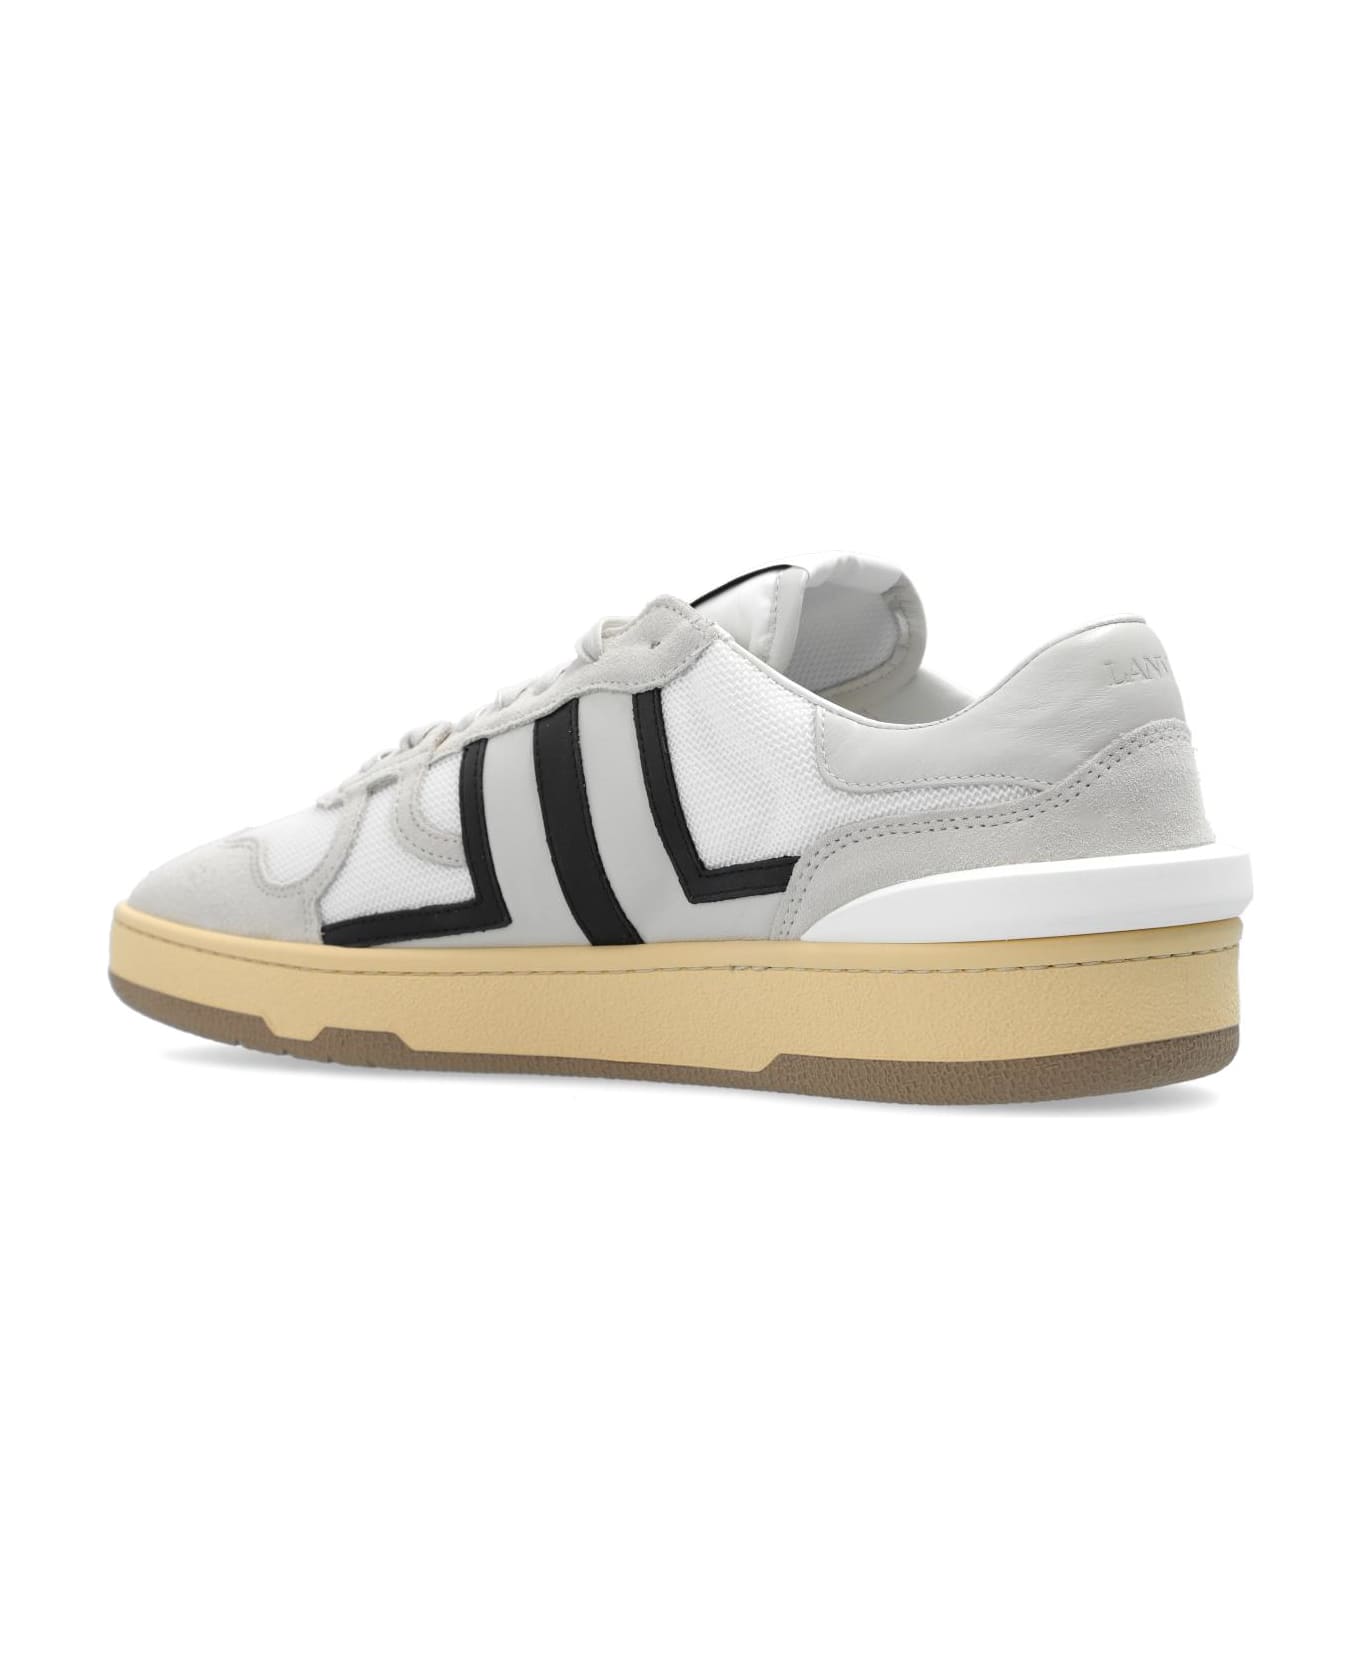 Lanvin 'clay Low' Sneakers - Black Off White スニーカー